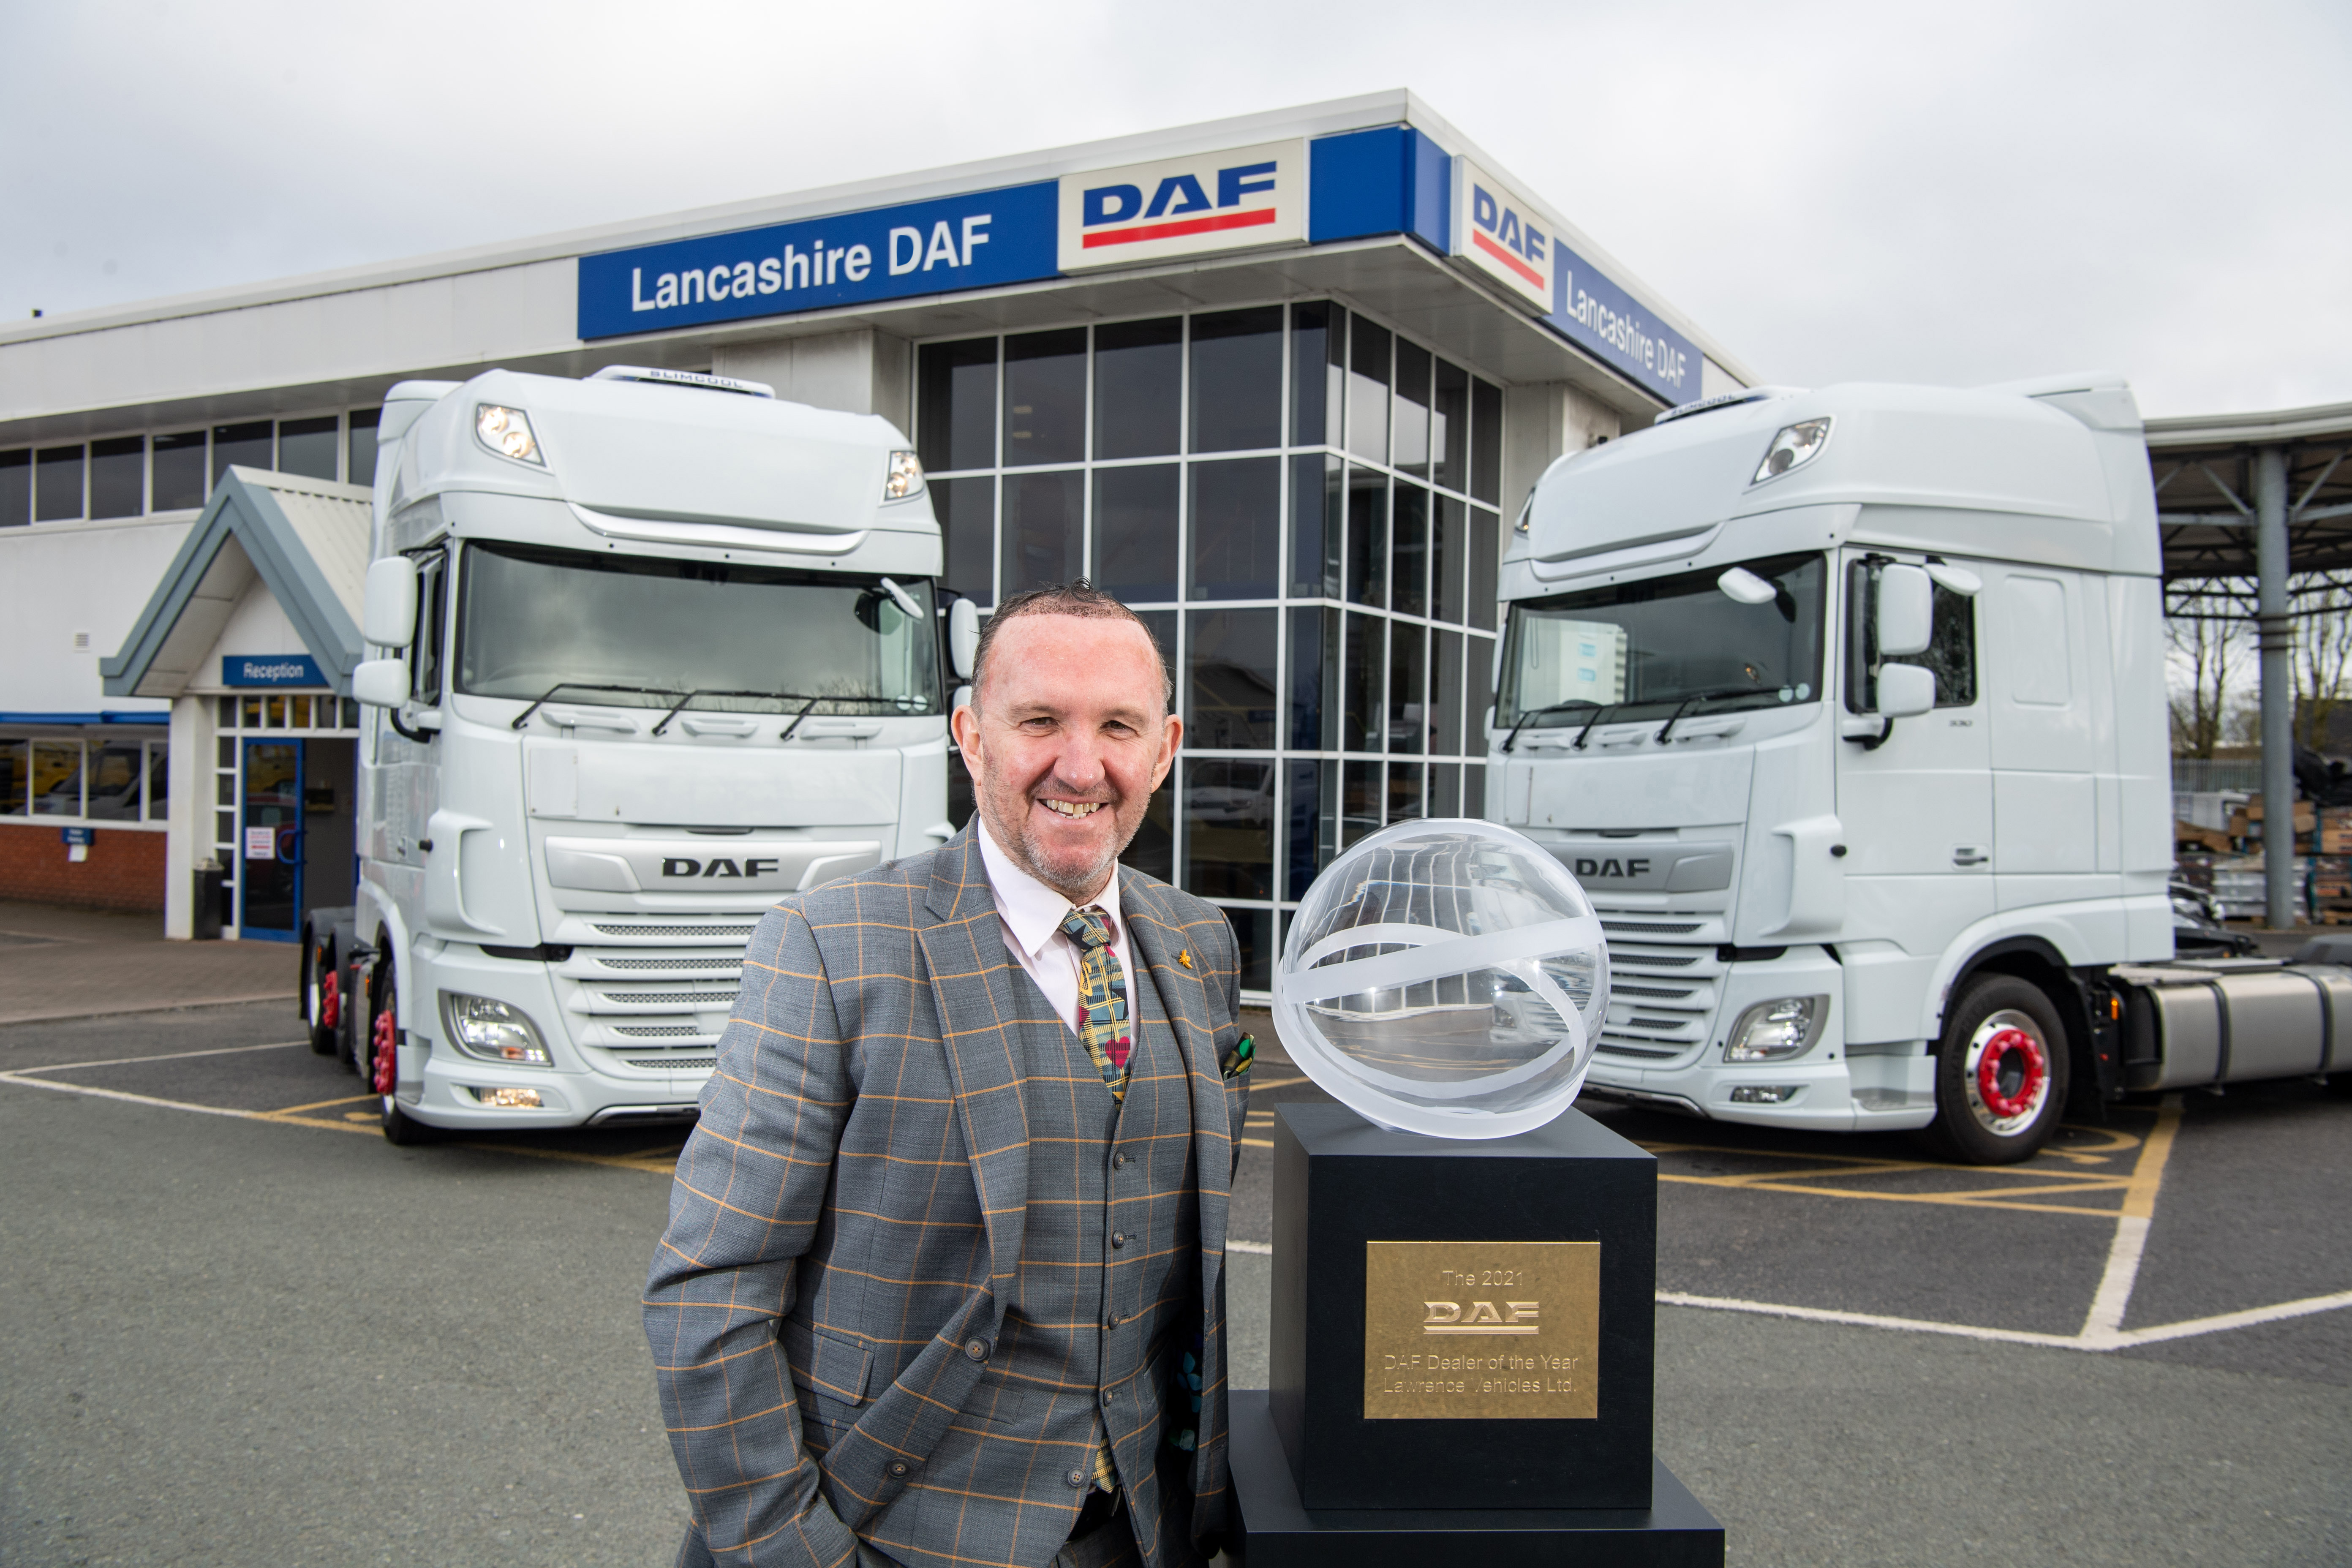 The-British-dealer-group-Lawrence-Vehicles-has-been-awarded-DAF-Dealer-of-the-Year-2021-01